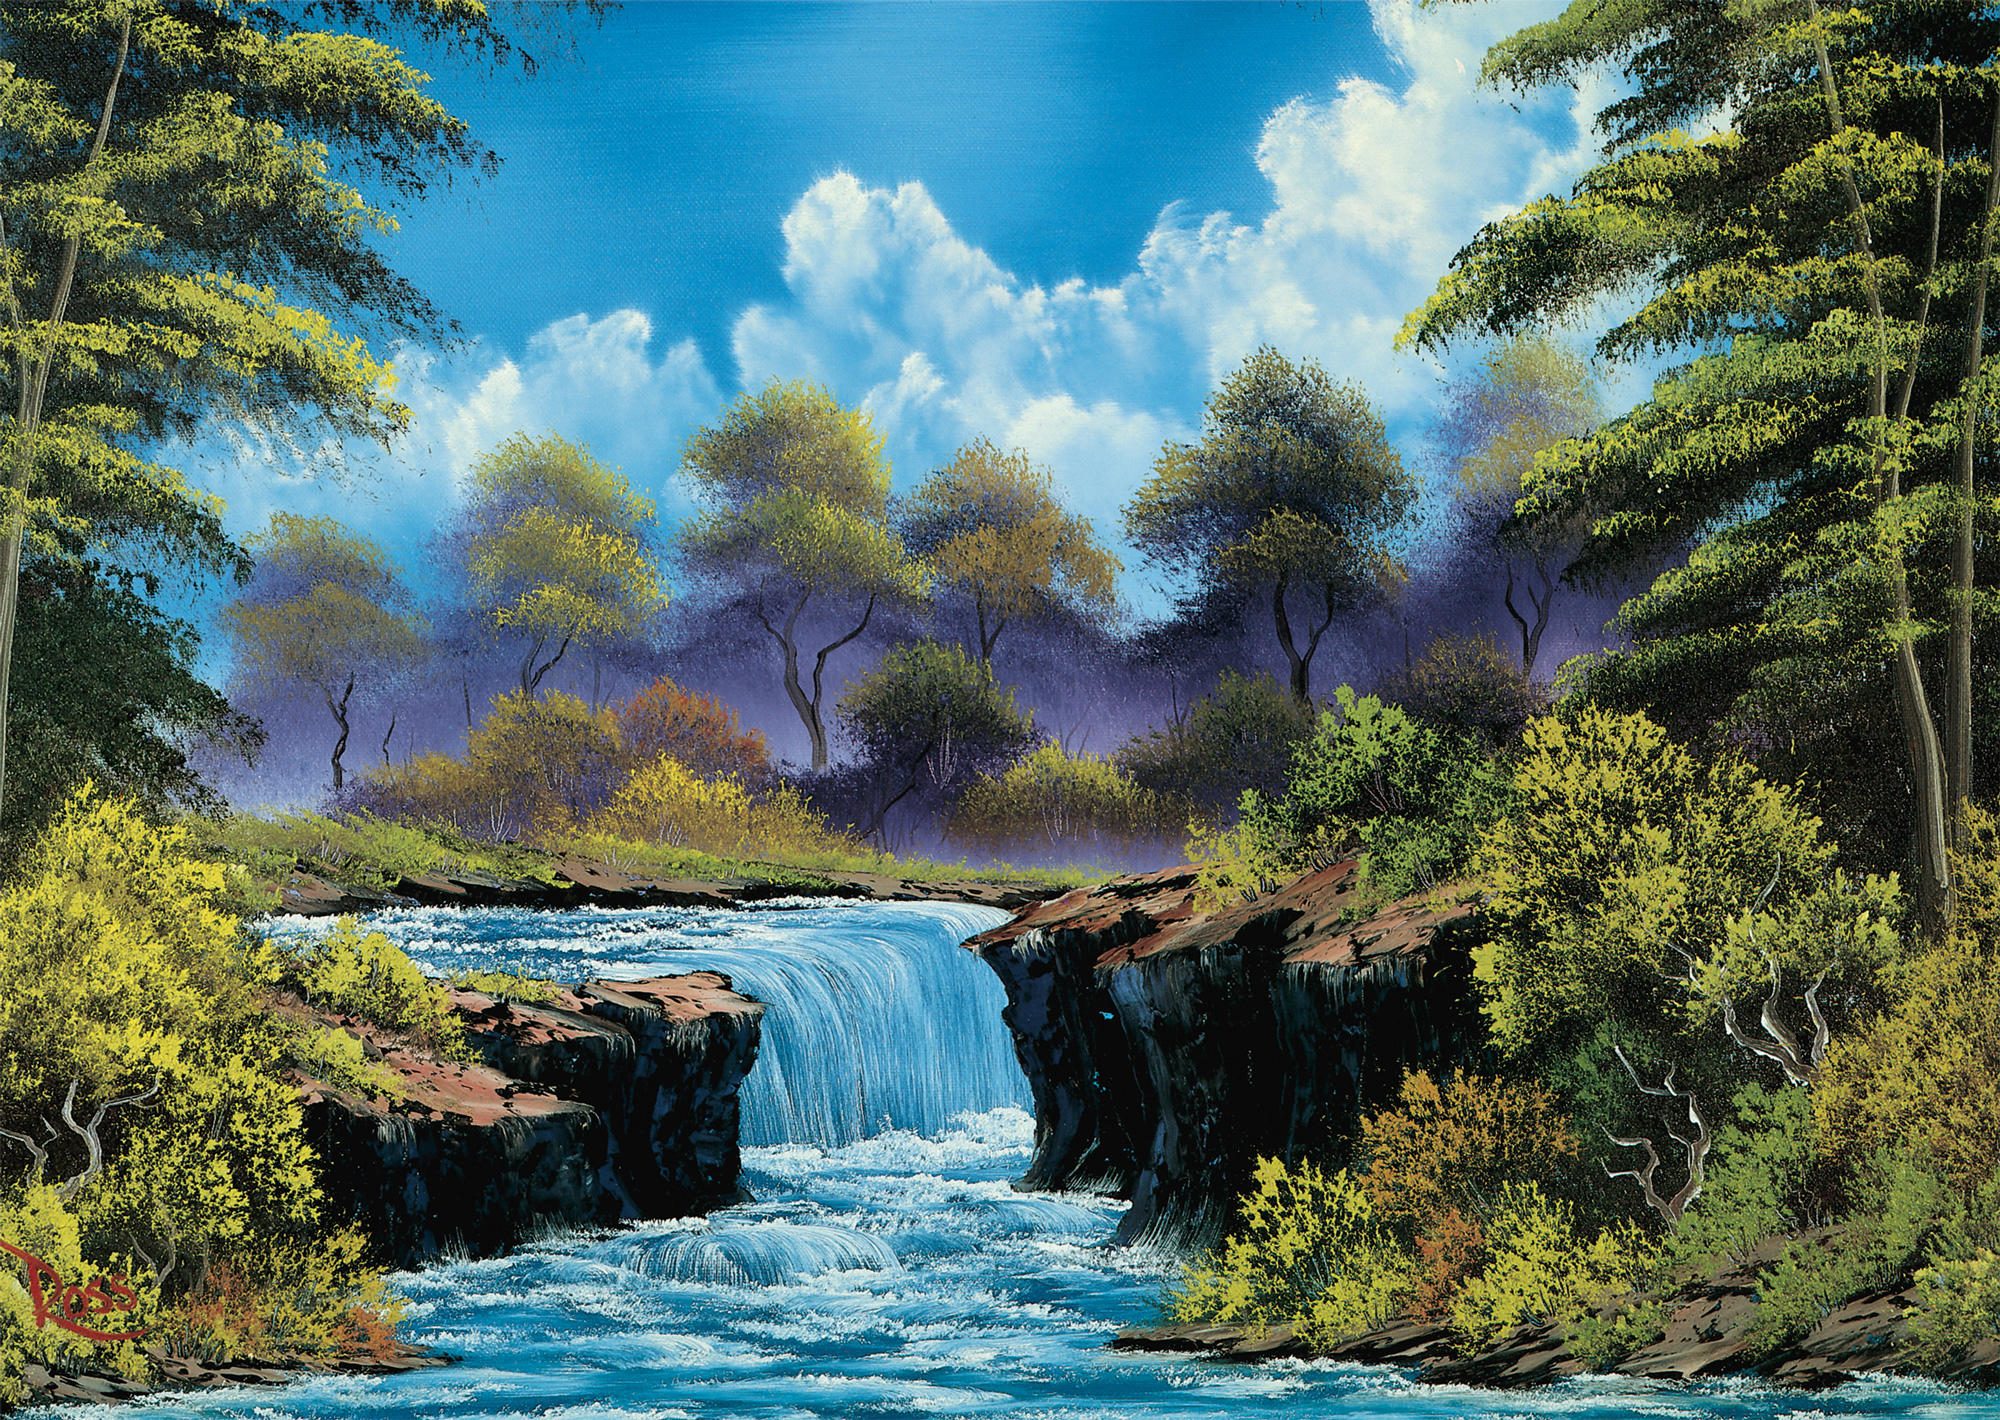 Bob Ross: Waterfall in the glade